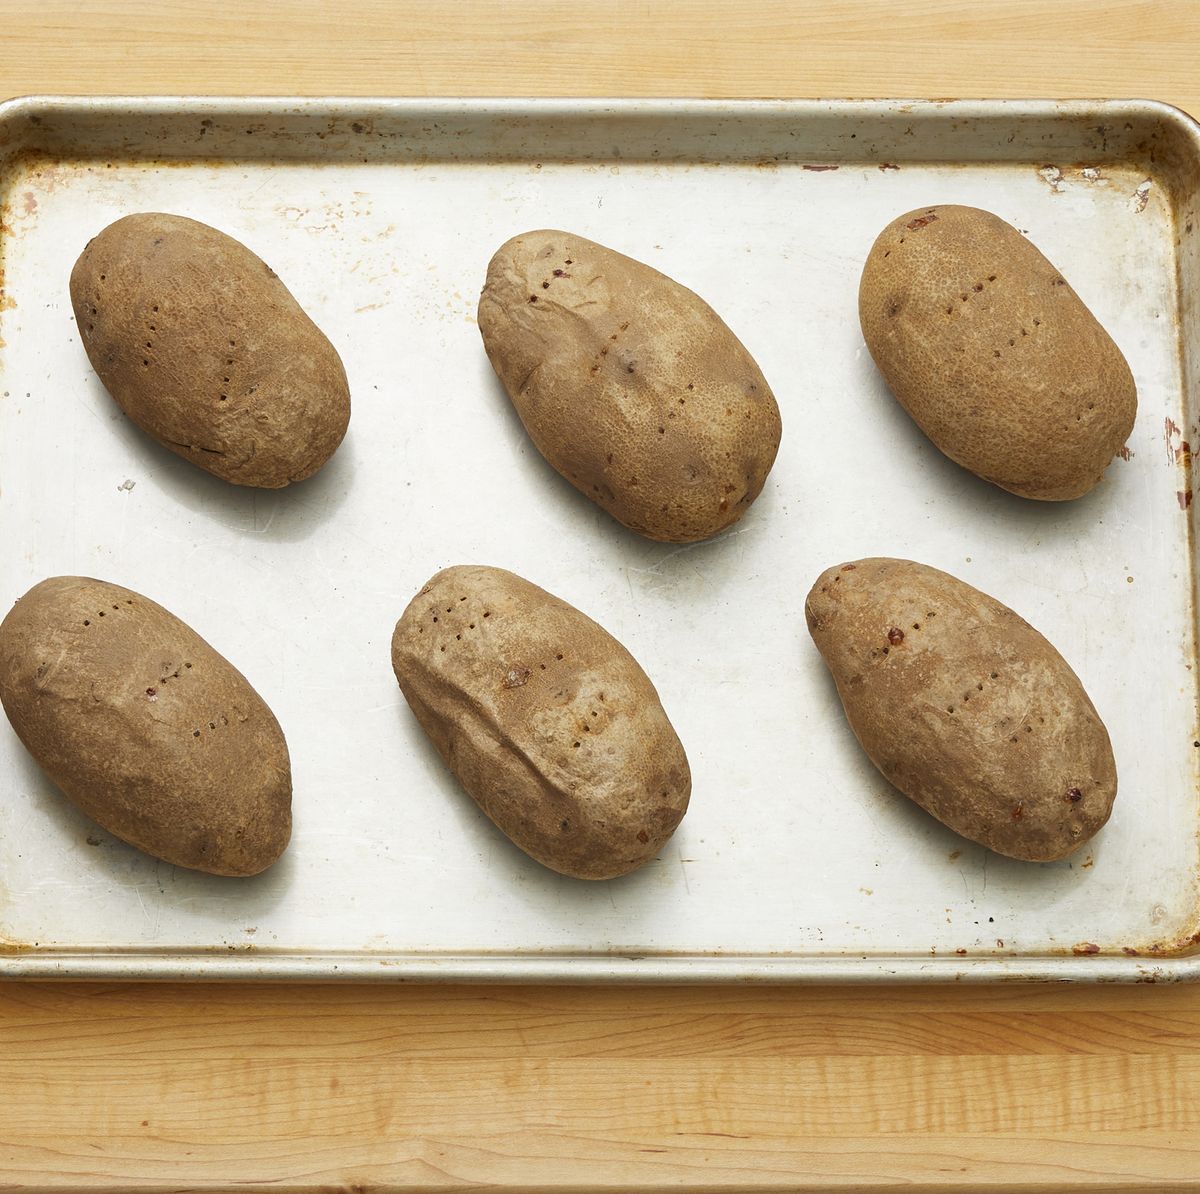 How to Bake a Potato in the Oven (Recipe)